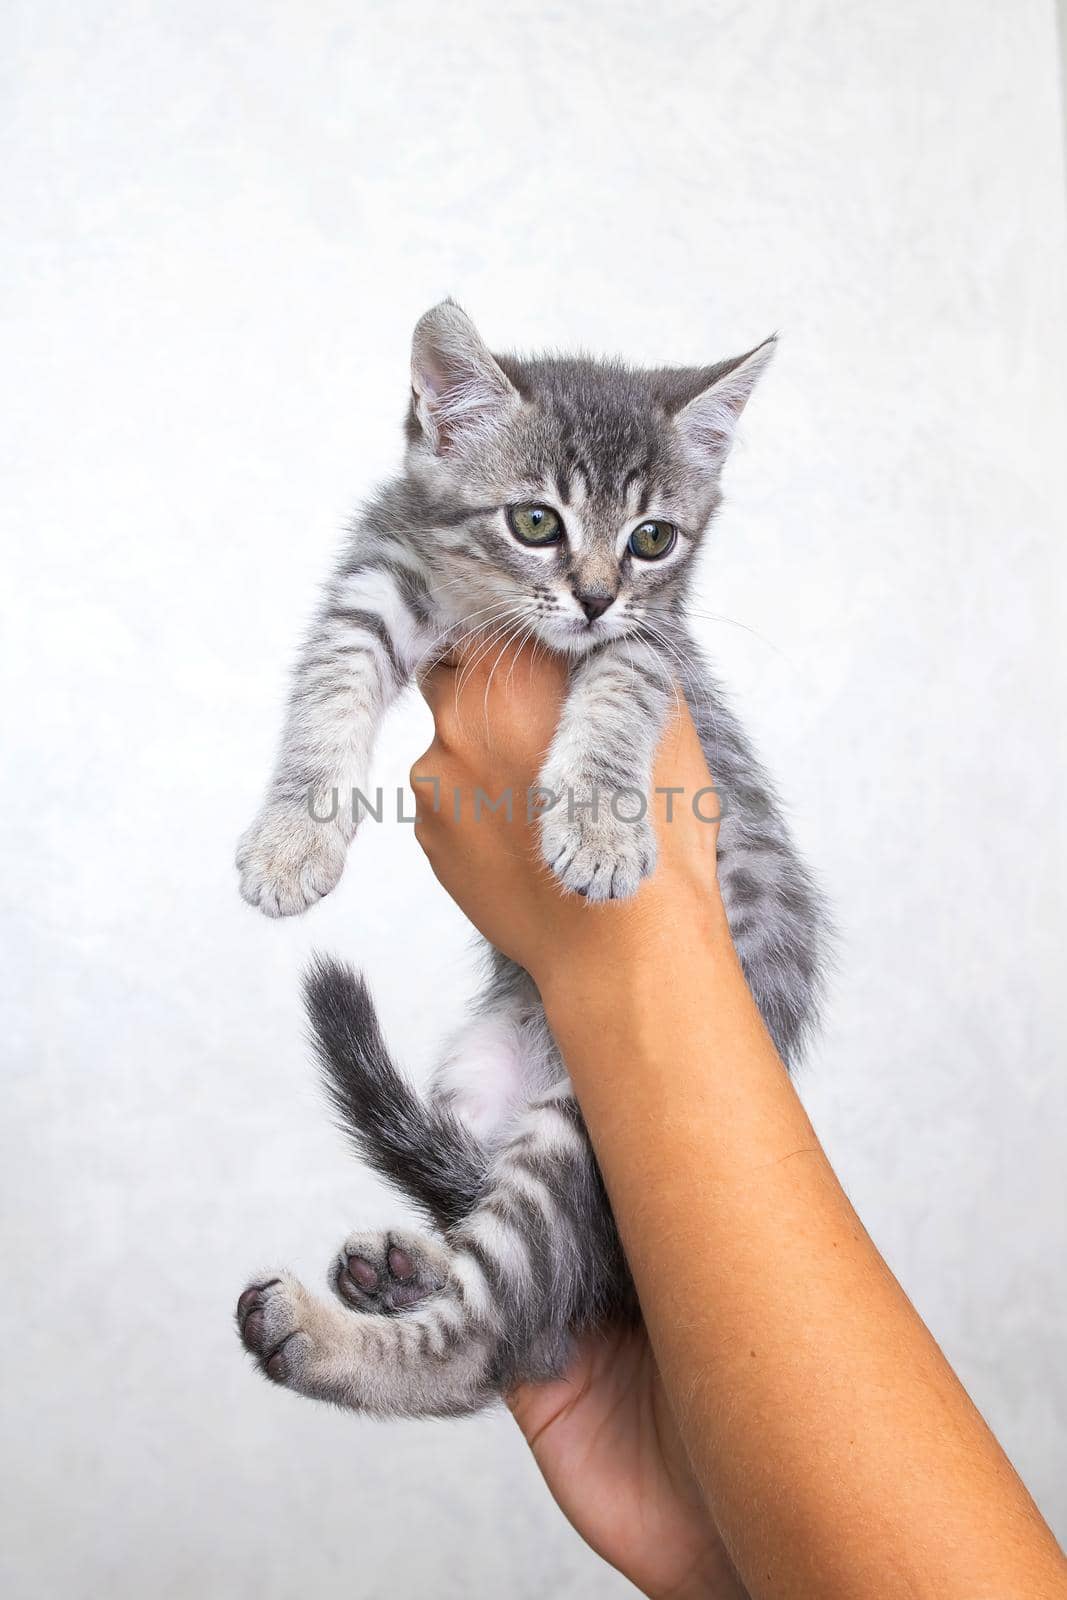 Small gray kitten in his hands on a gray background by Vera1703